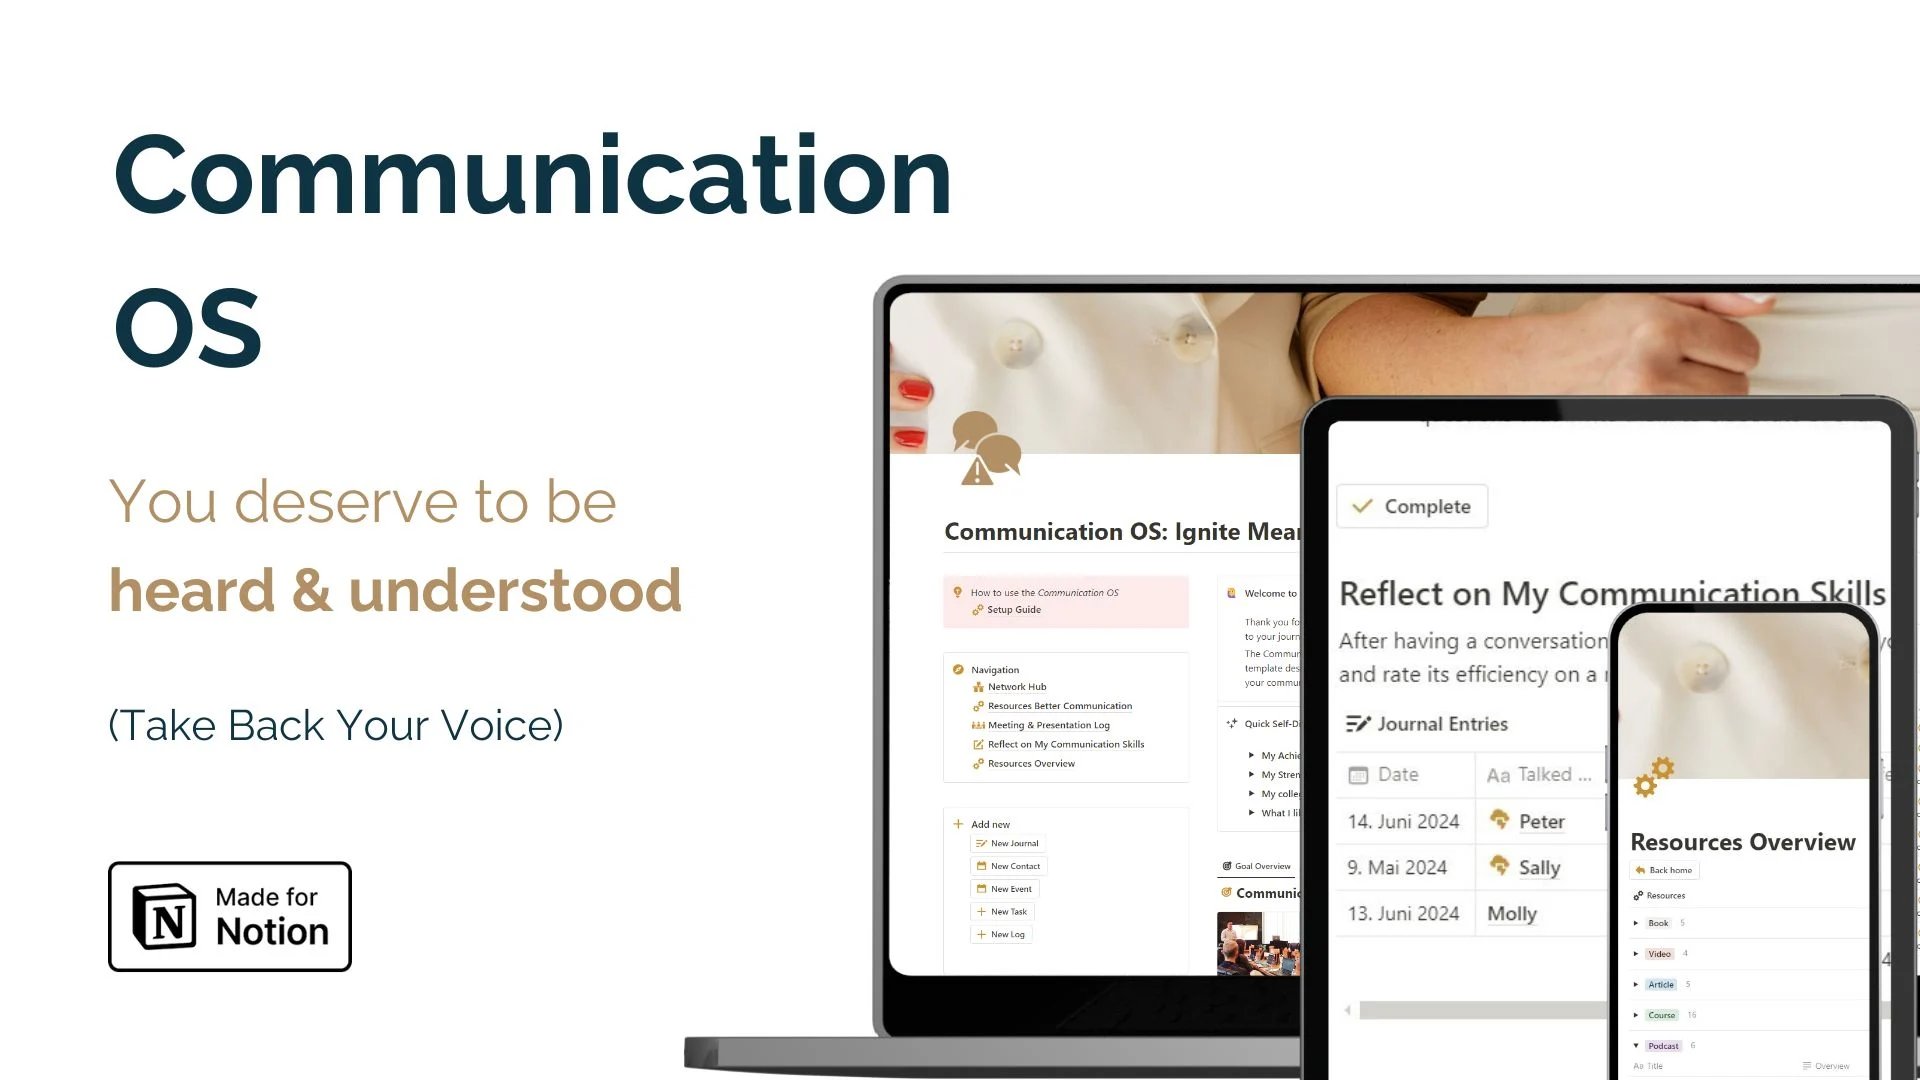 All-in-one Notion Operating System to improve your communication skills. Communication OS is built to help you ignite your communication skills, speak up and building stronger connections.